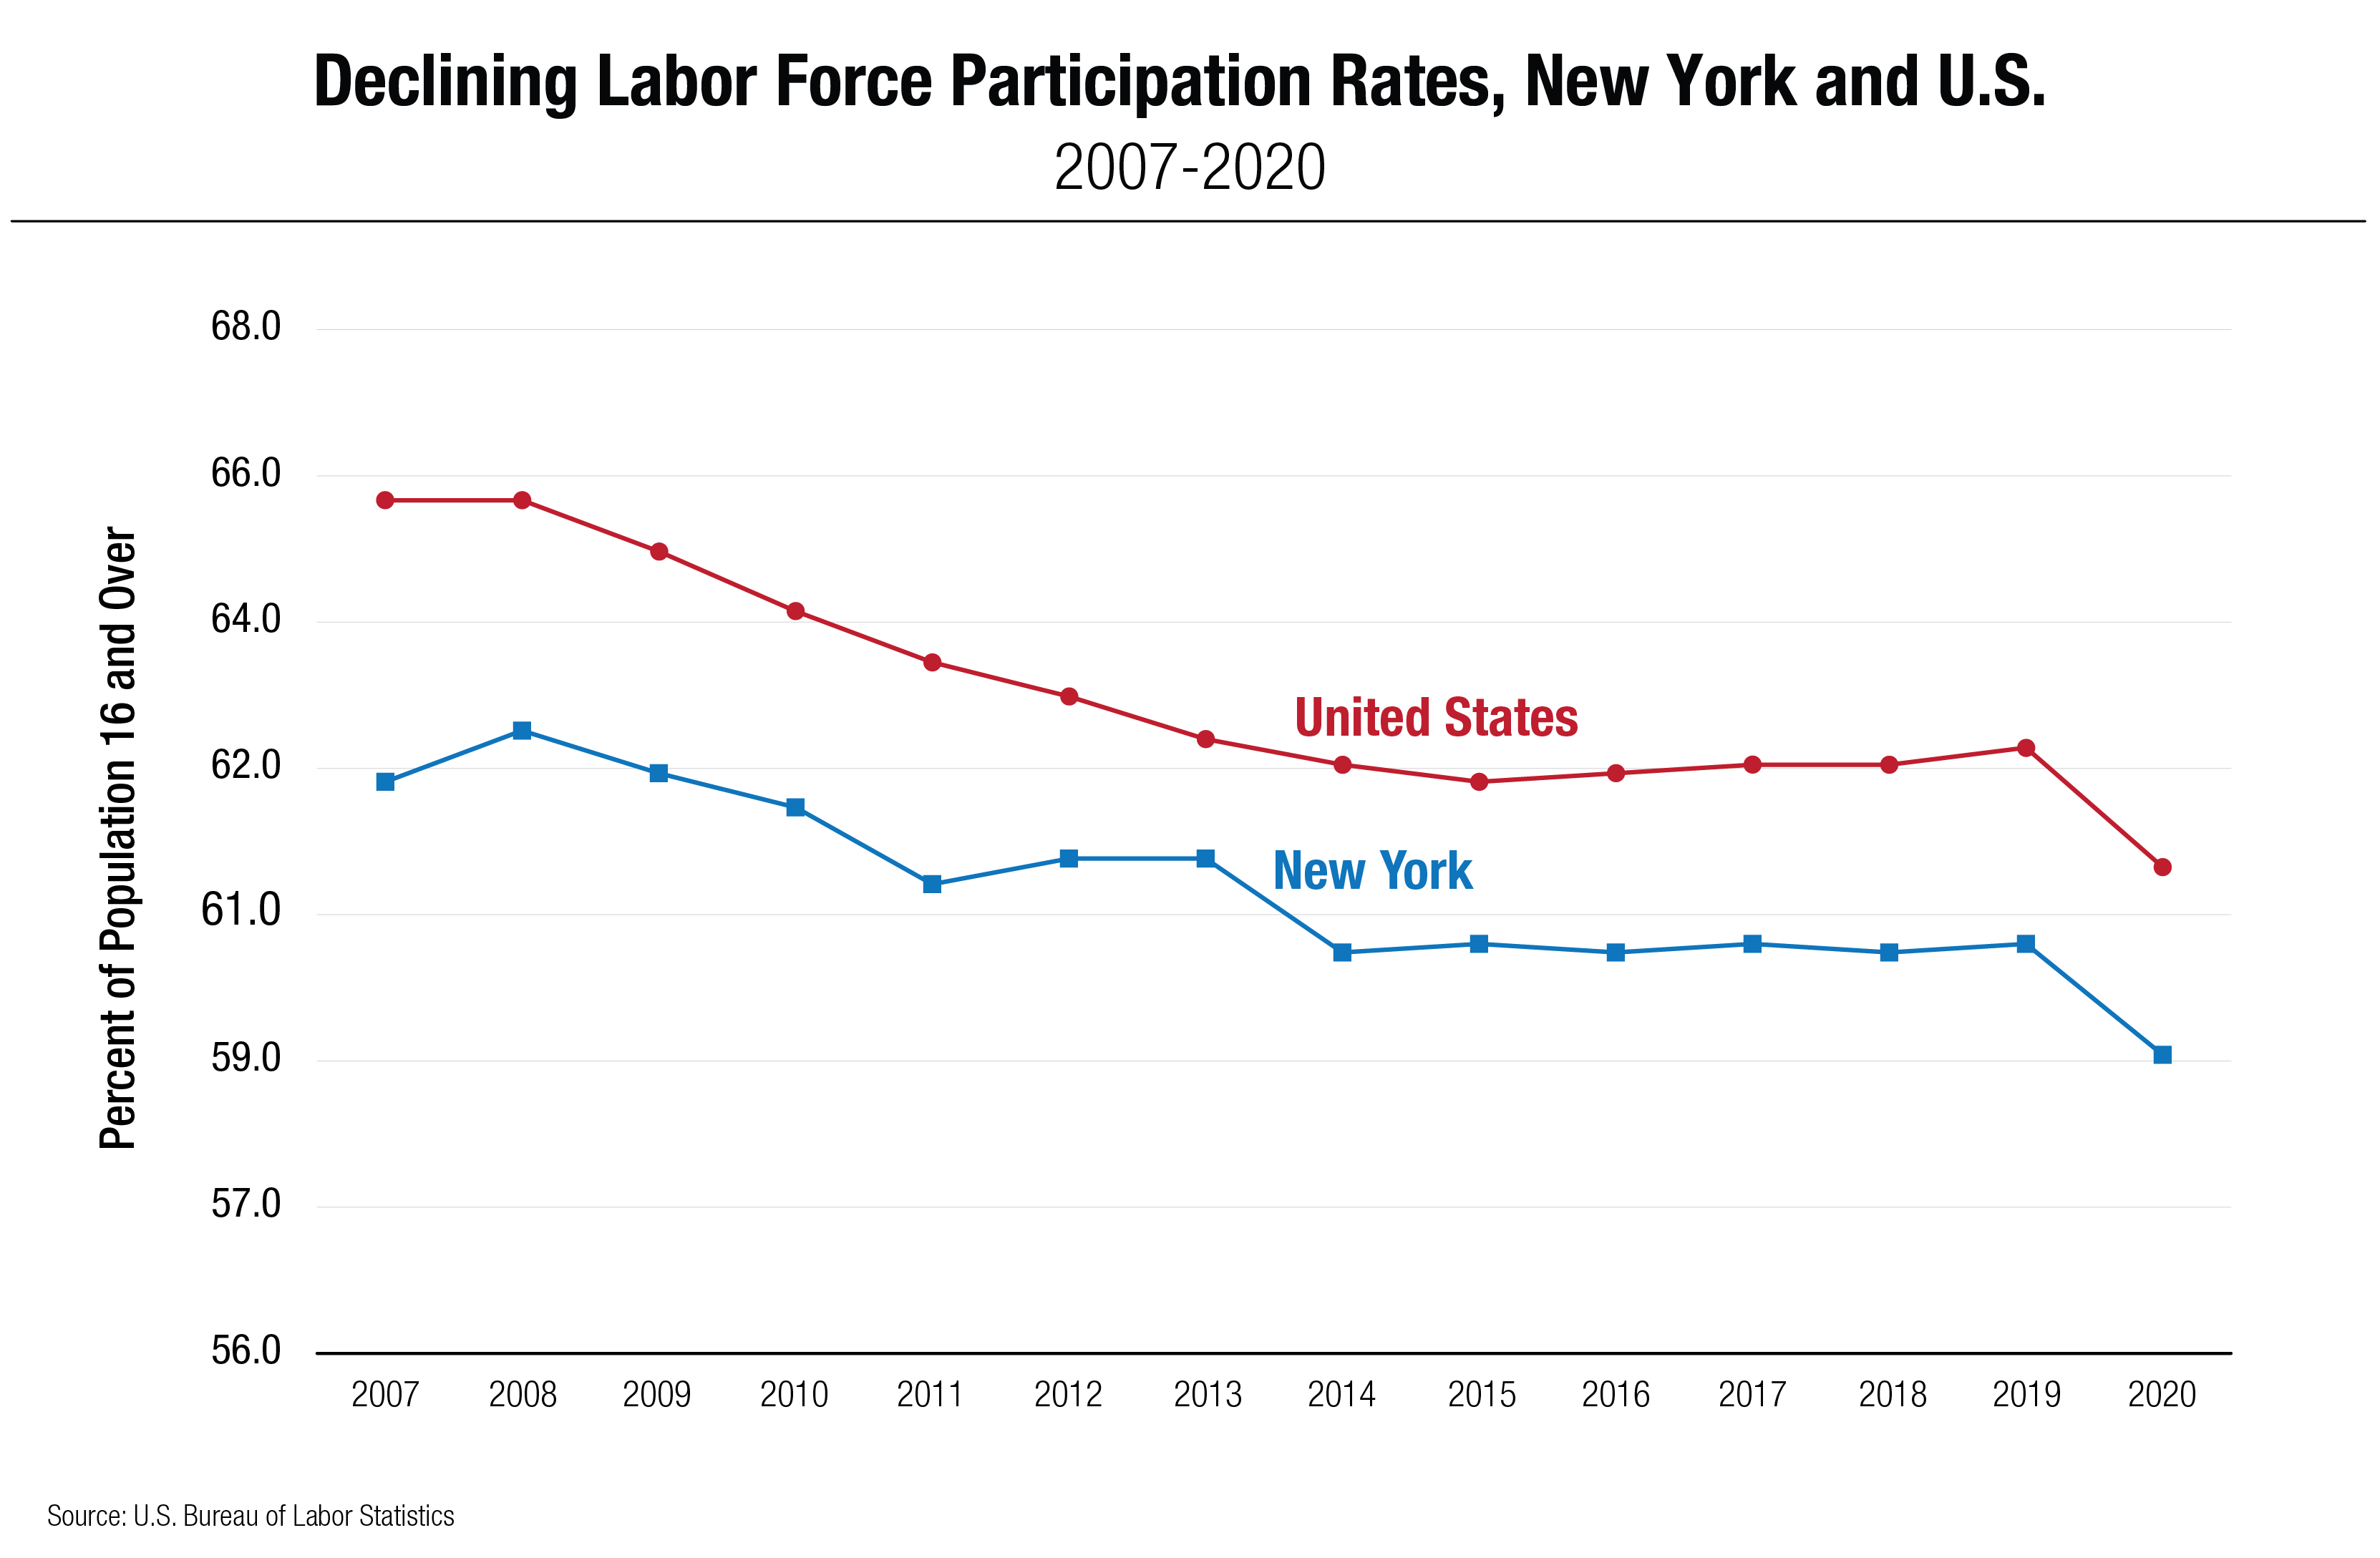 Declining Labor Force Participation Rates, New York and U.S. (2007 - 2020)